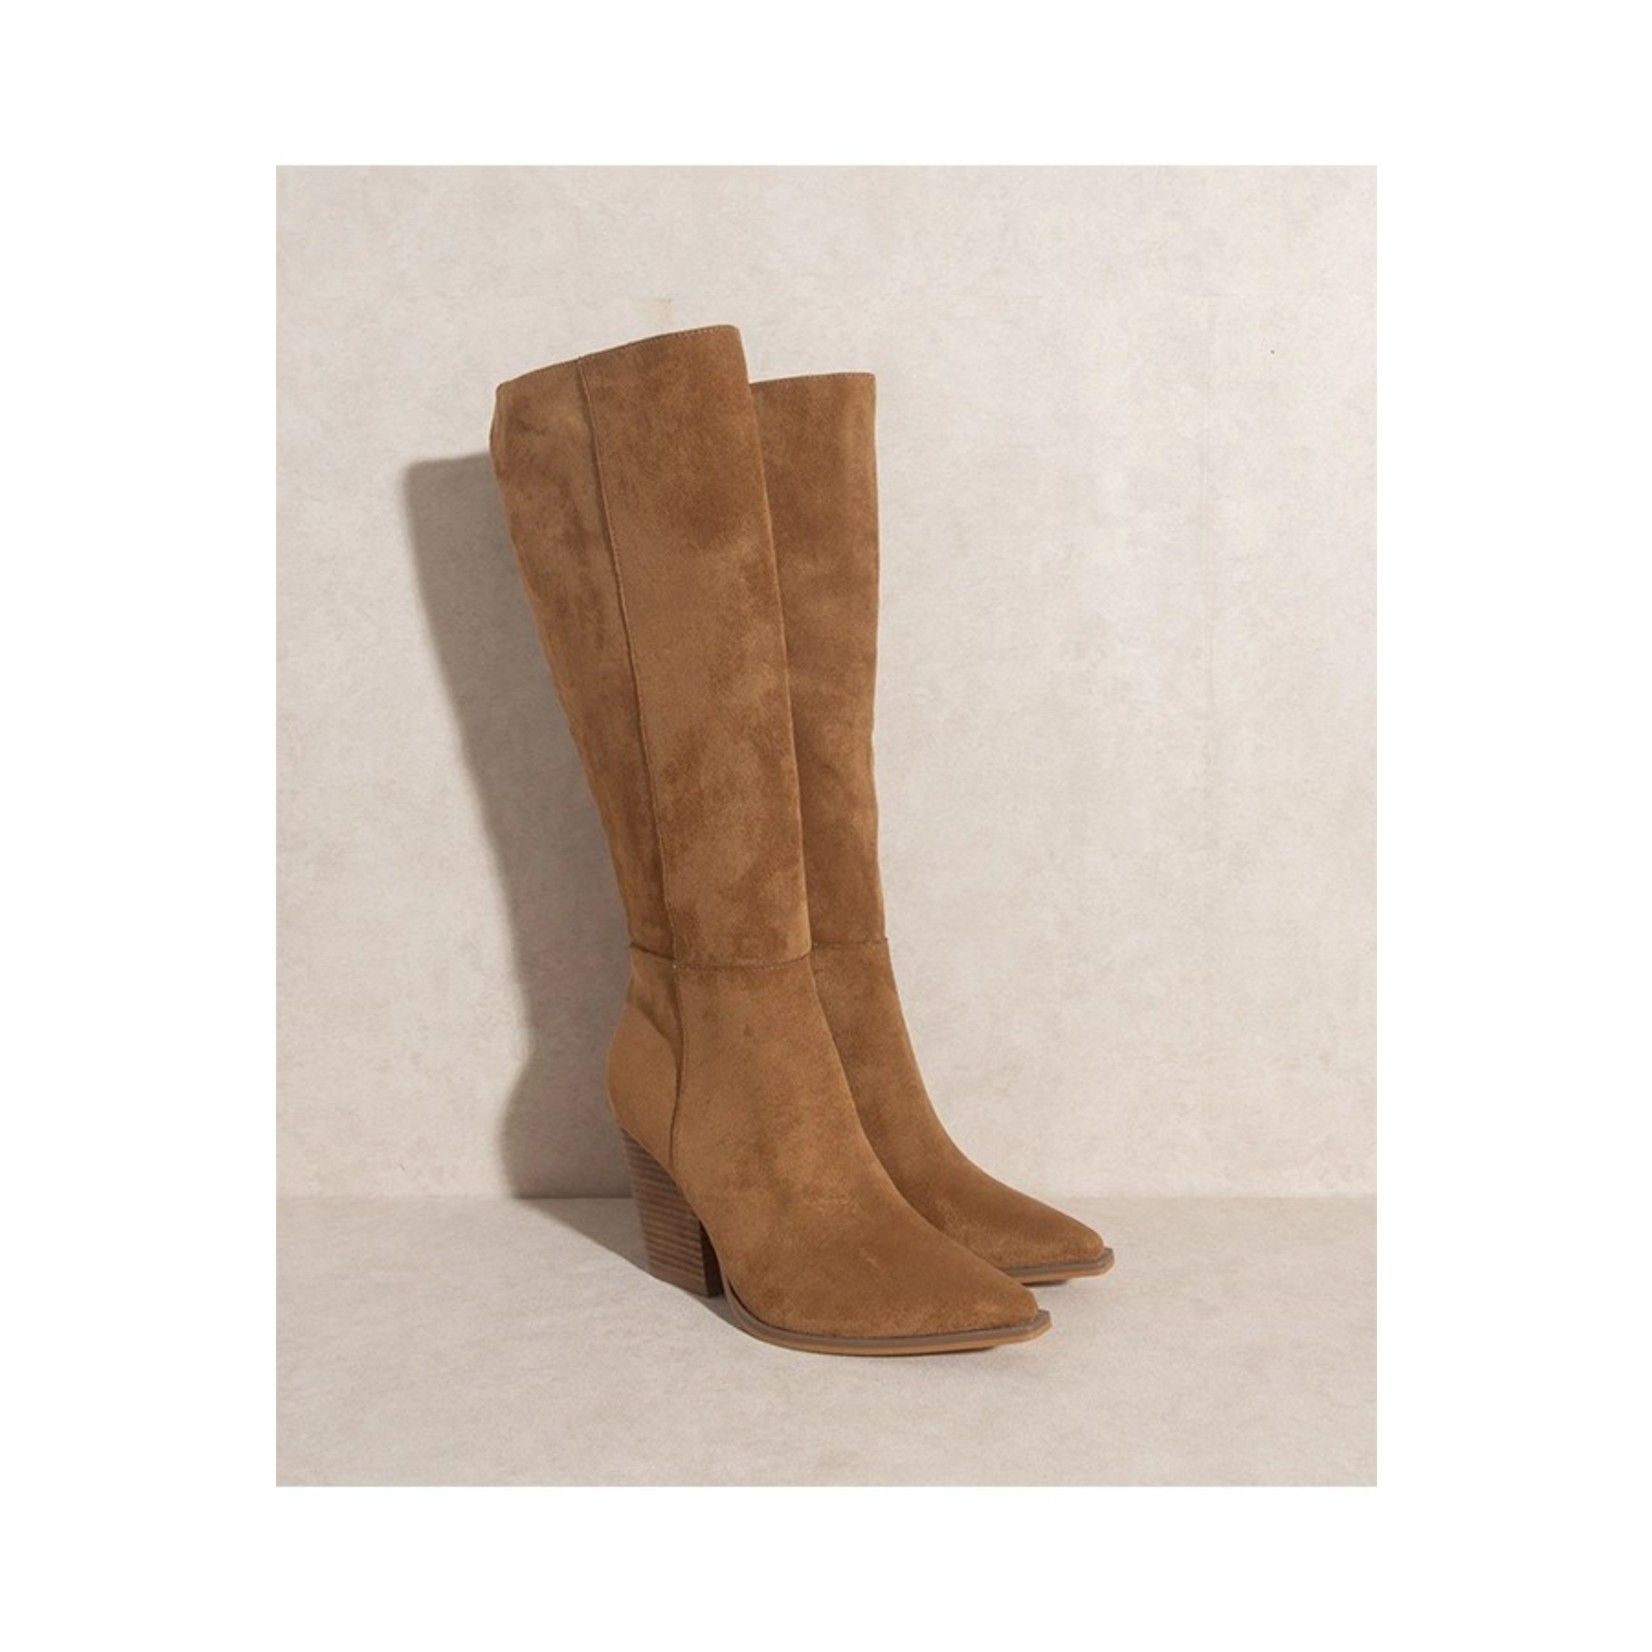 Let's See Style Lilliana Tall Suede Heeled Boot